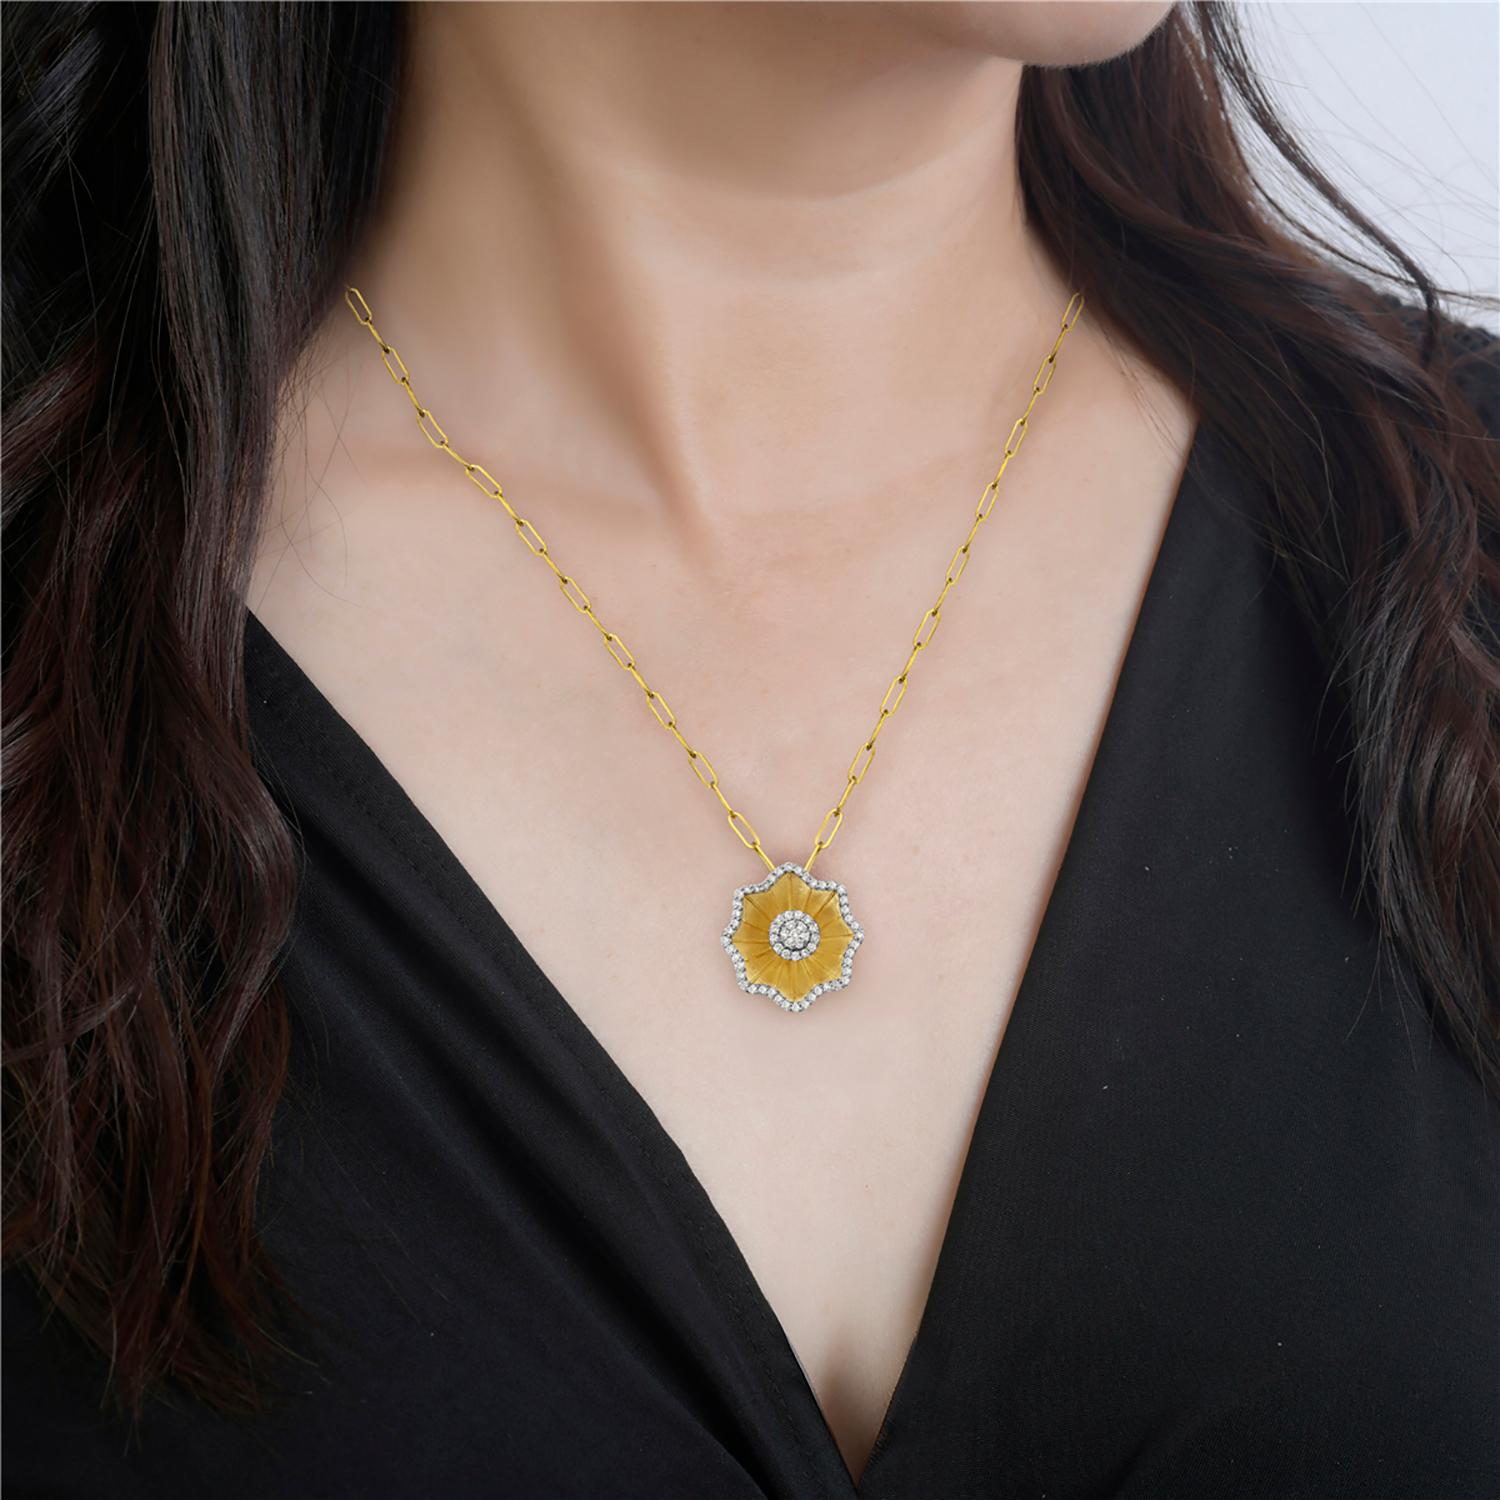 This beautiful pendant is hand-carved with intricate floral details and features a sparkling halo of pave-set diamonds. Made from 14k yellow gold, this pendant is the perfect accessory to add elegance and sophistication to any